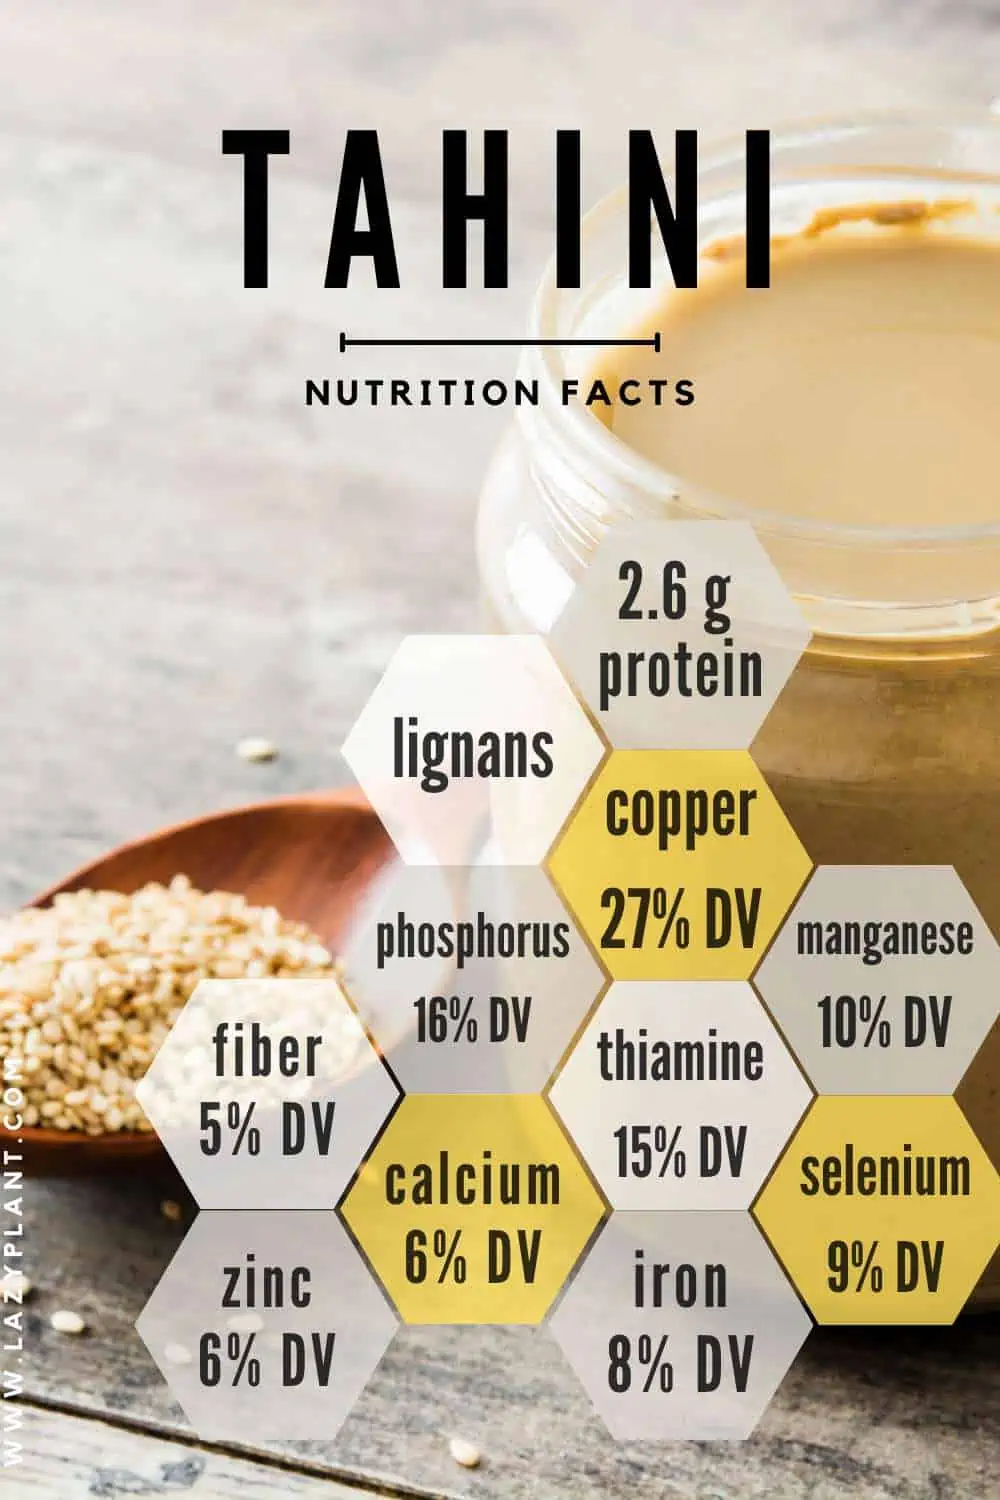 tahini is an excellent post-workout food, due to its superior nutritional value!